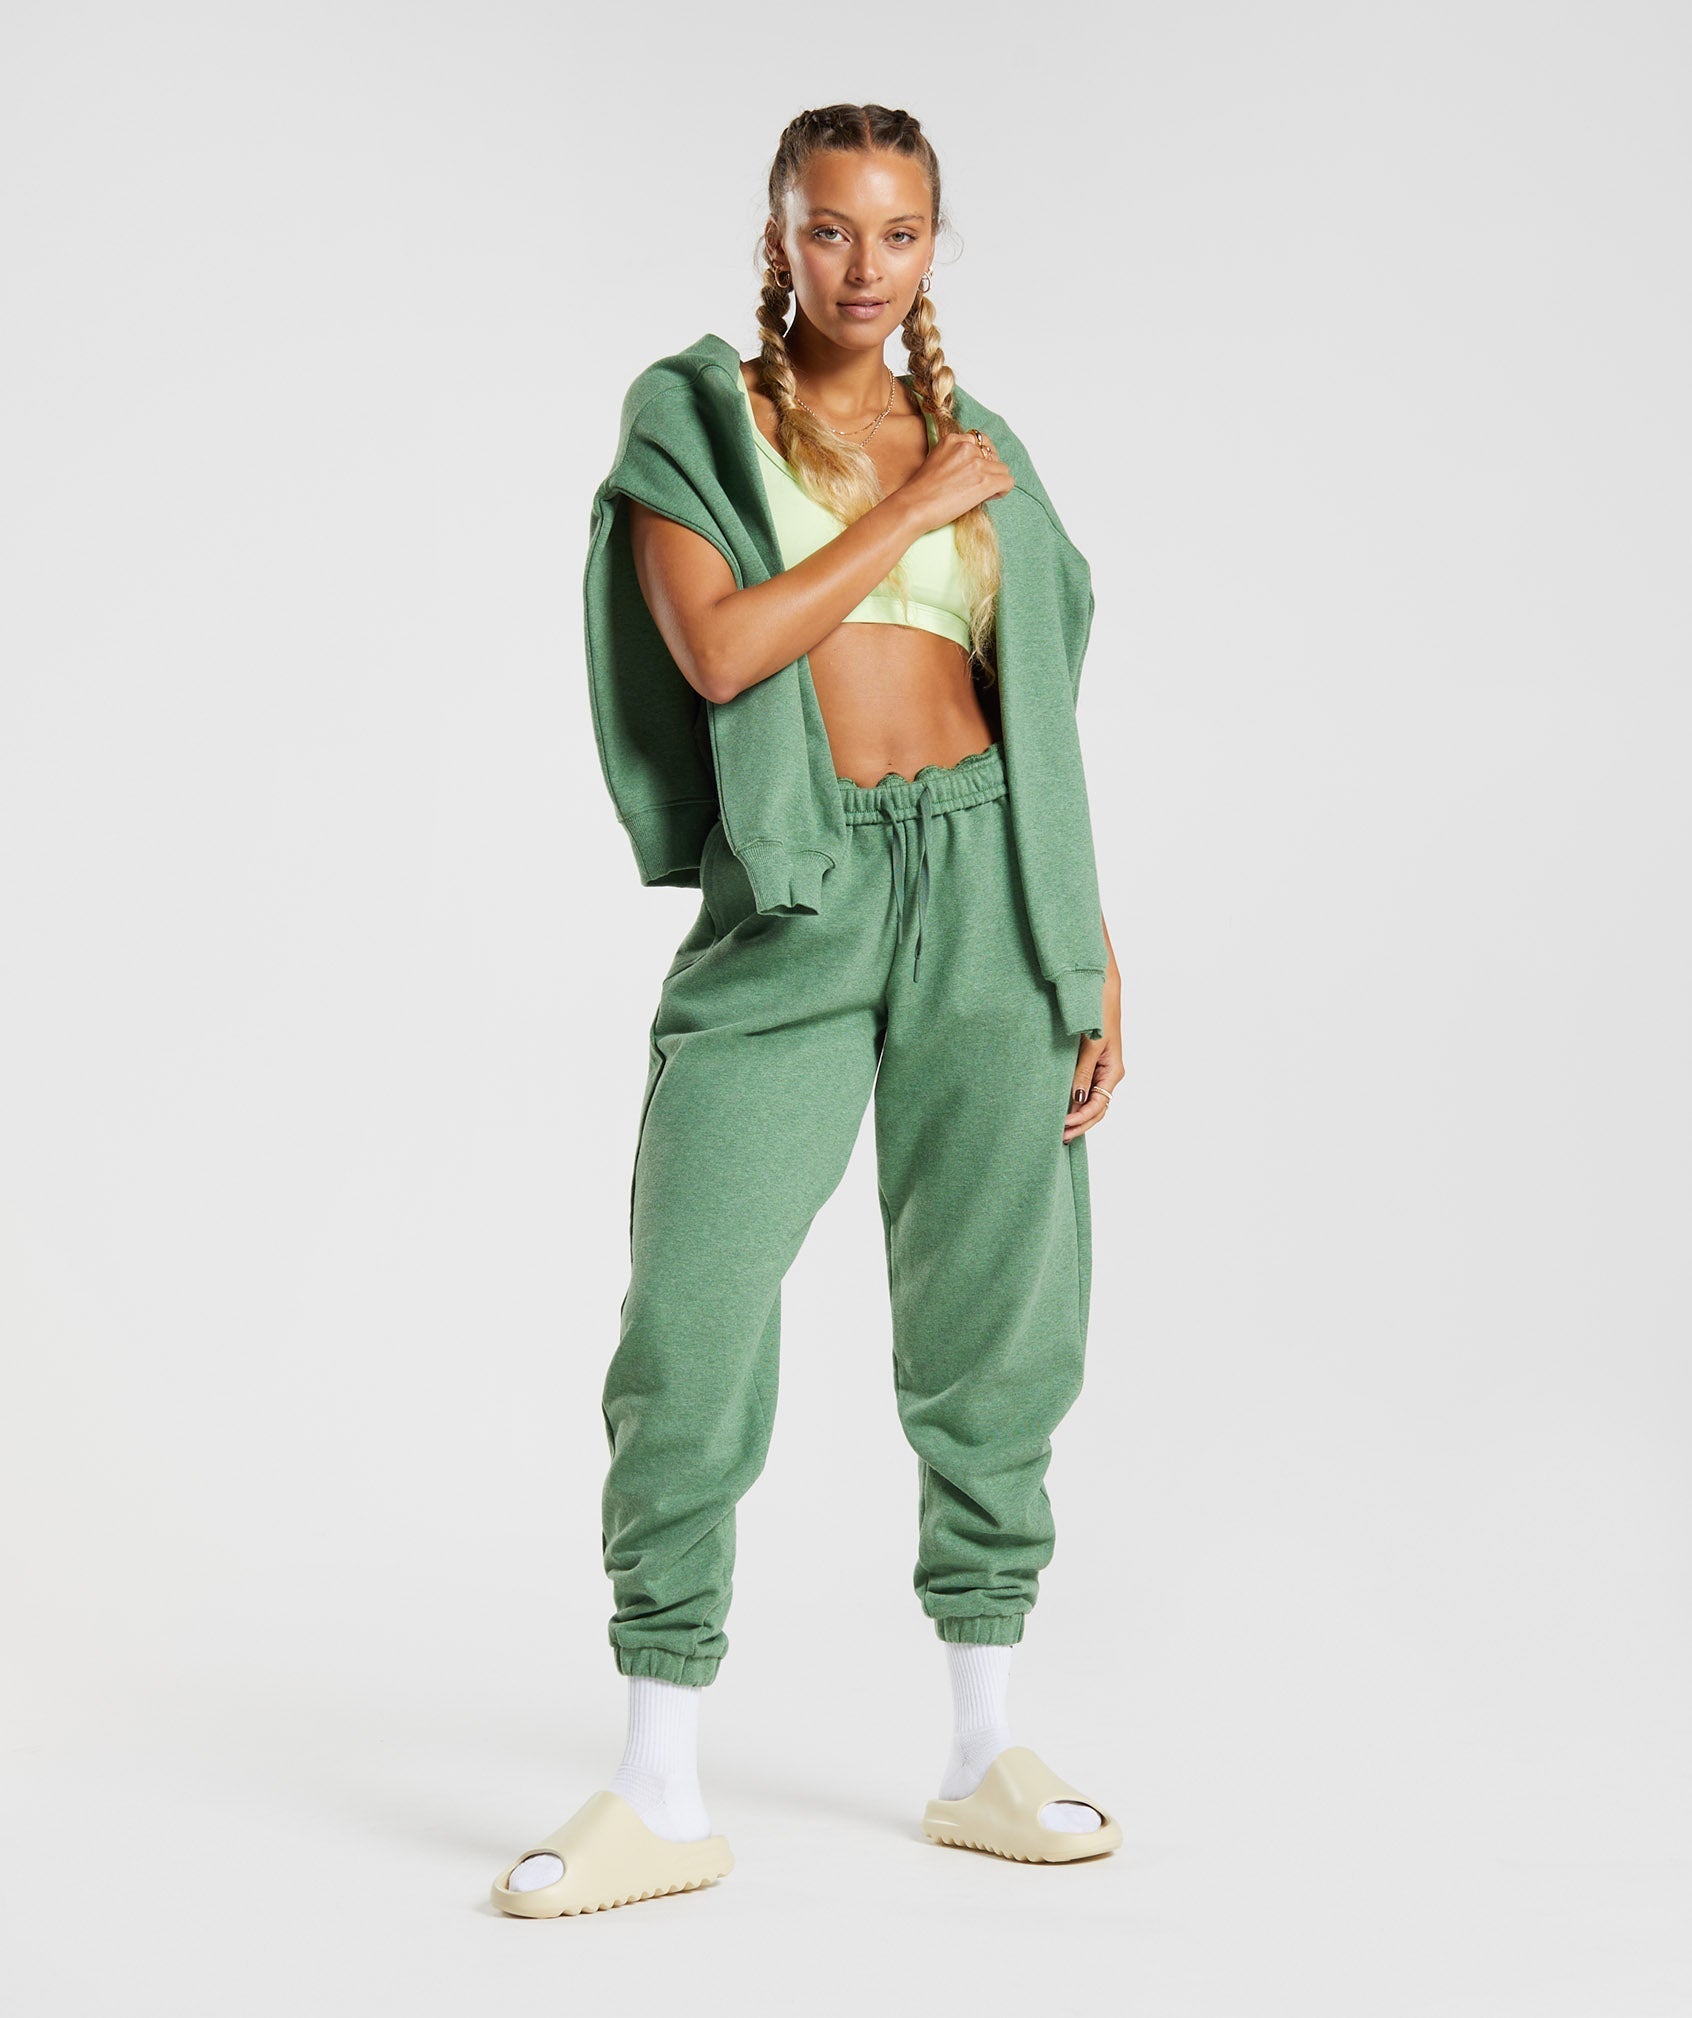 Rest Day Sweats Joggers in Crocodile Green Marl - view 4